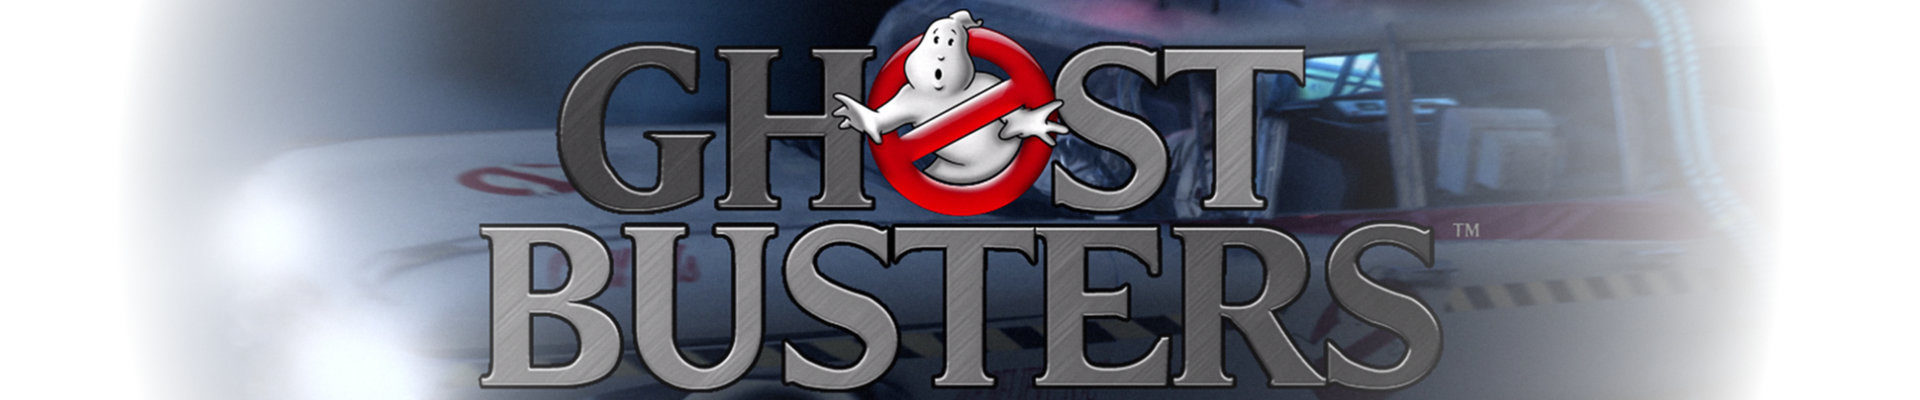 Thoughts on: Ghostbusters: The Video Game Remastered